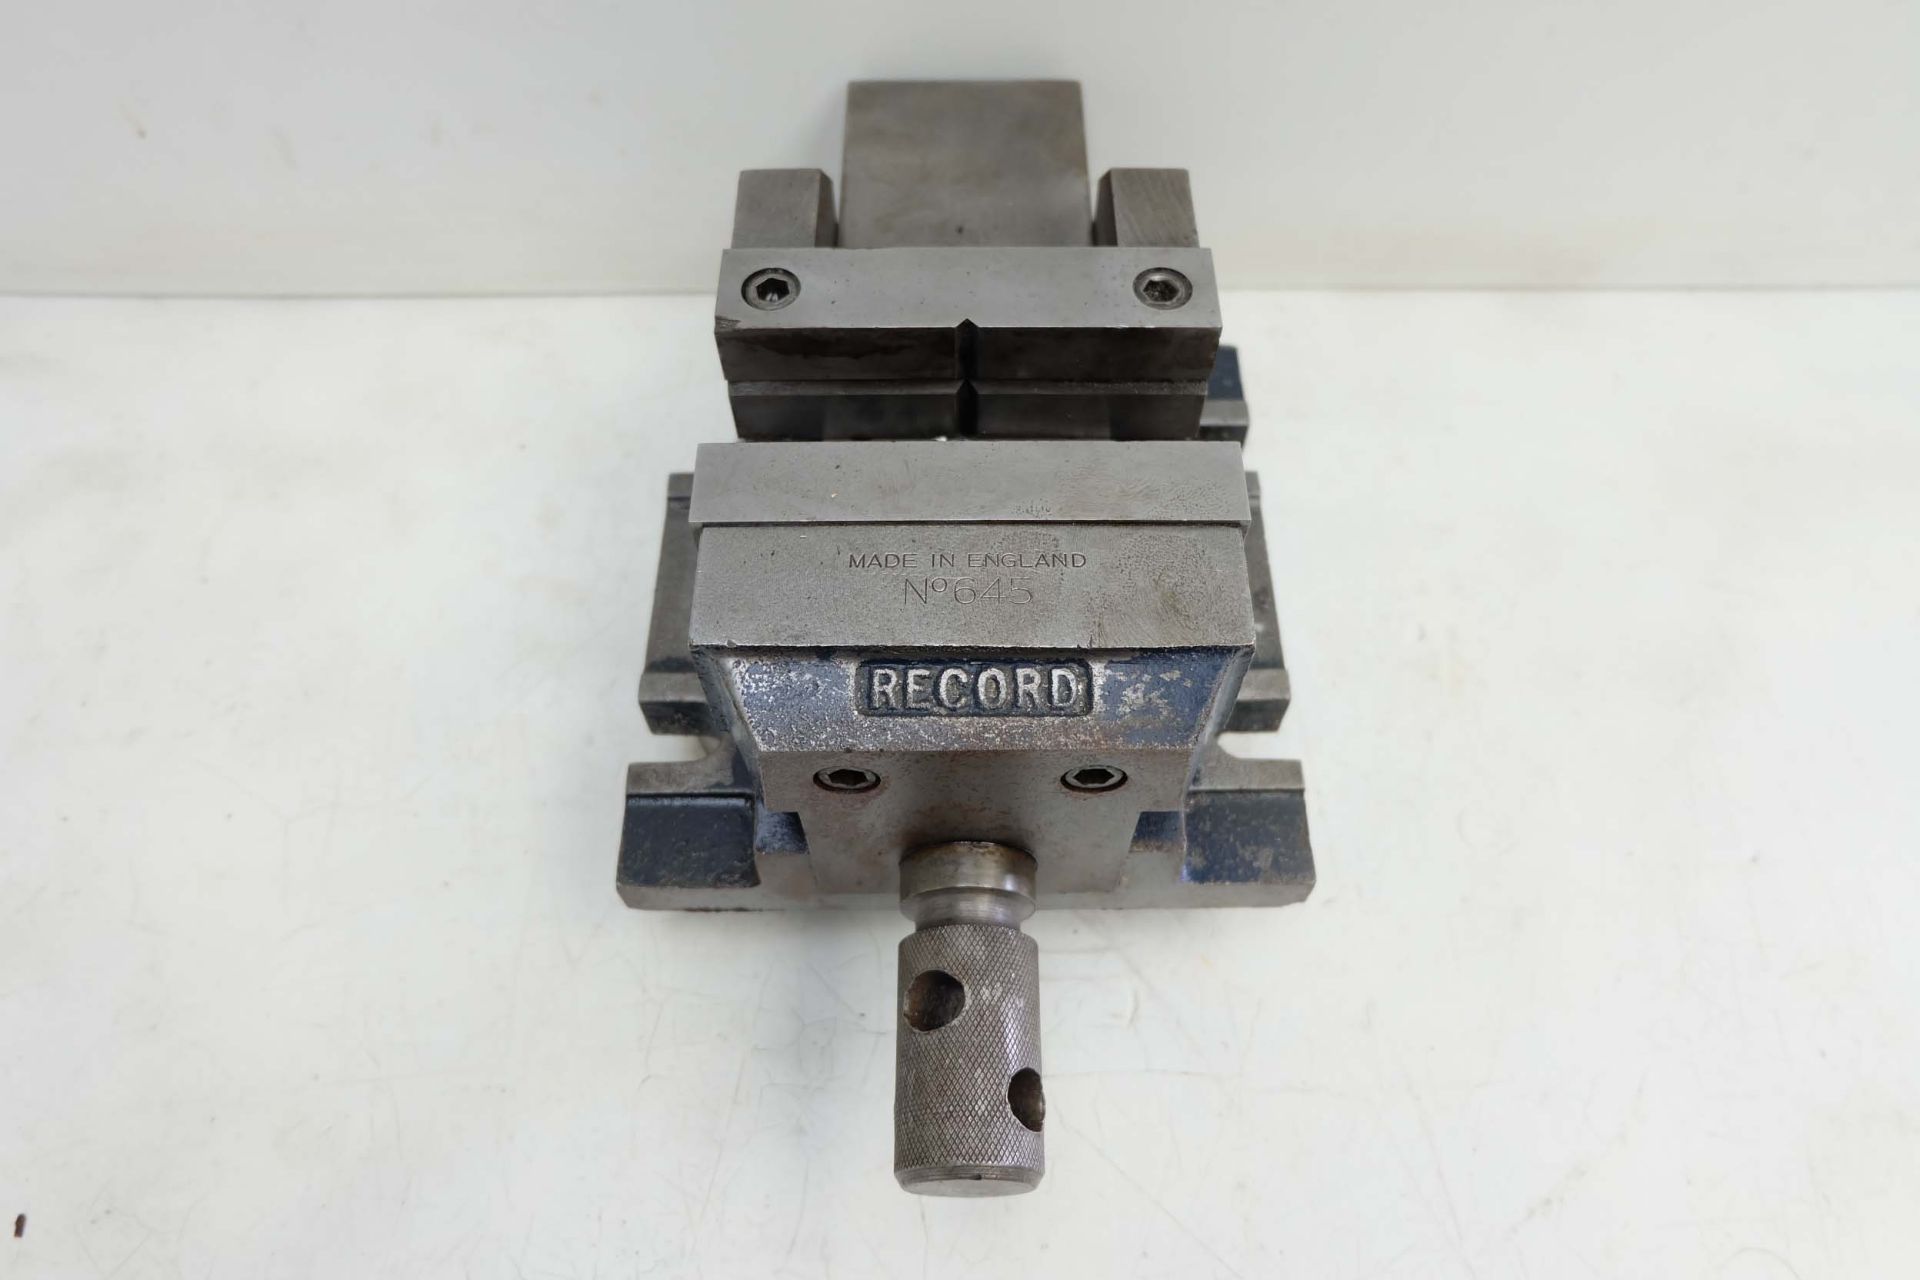 Record No.645 Engineers Machine Vice. Jaw Width 5". Max Opening 6 3/4".